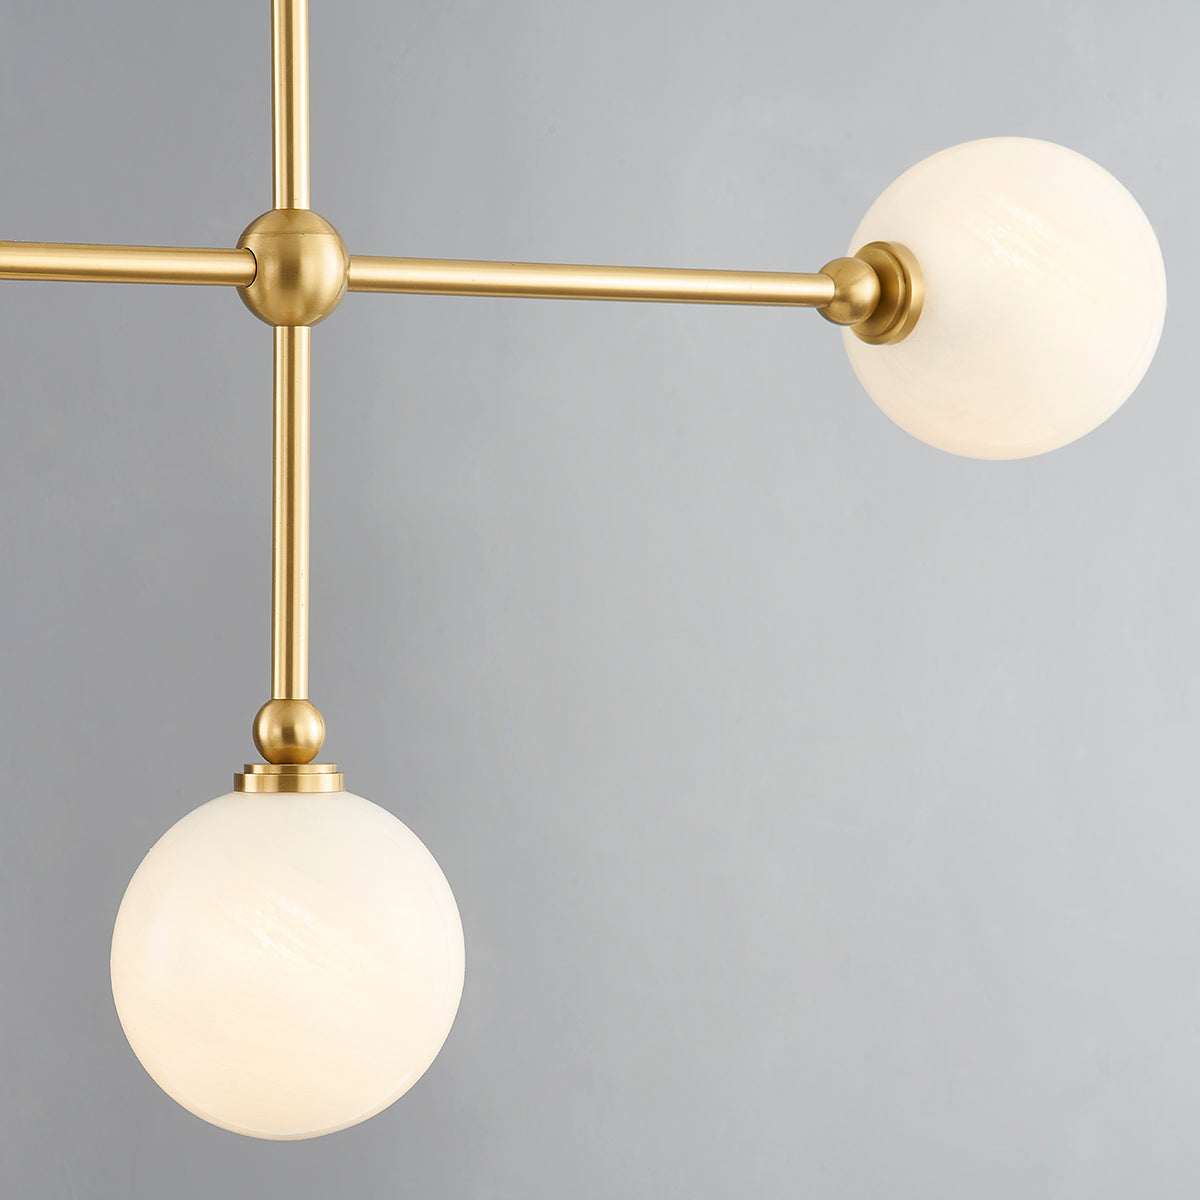 Aged Brass Rod Frame with Cloud Globe Glass Shade Linear Chandelier